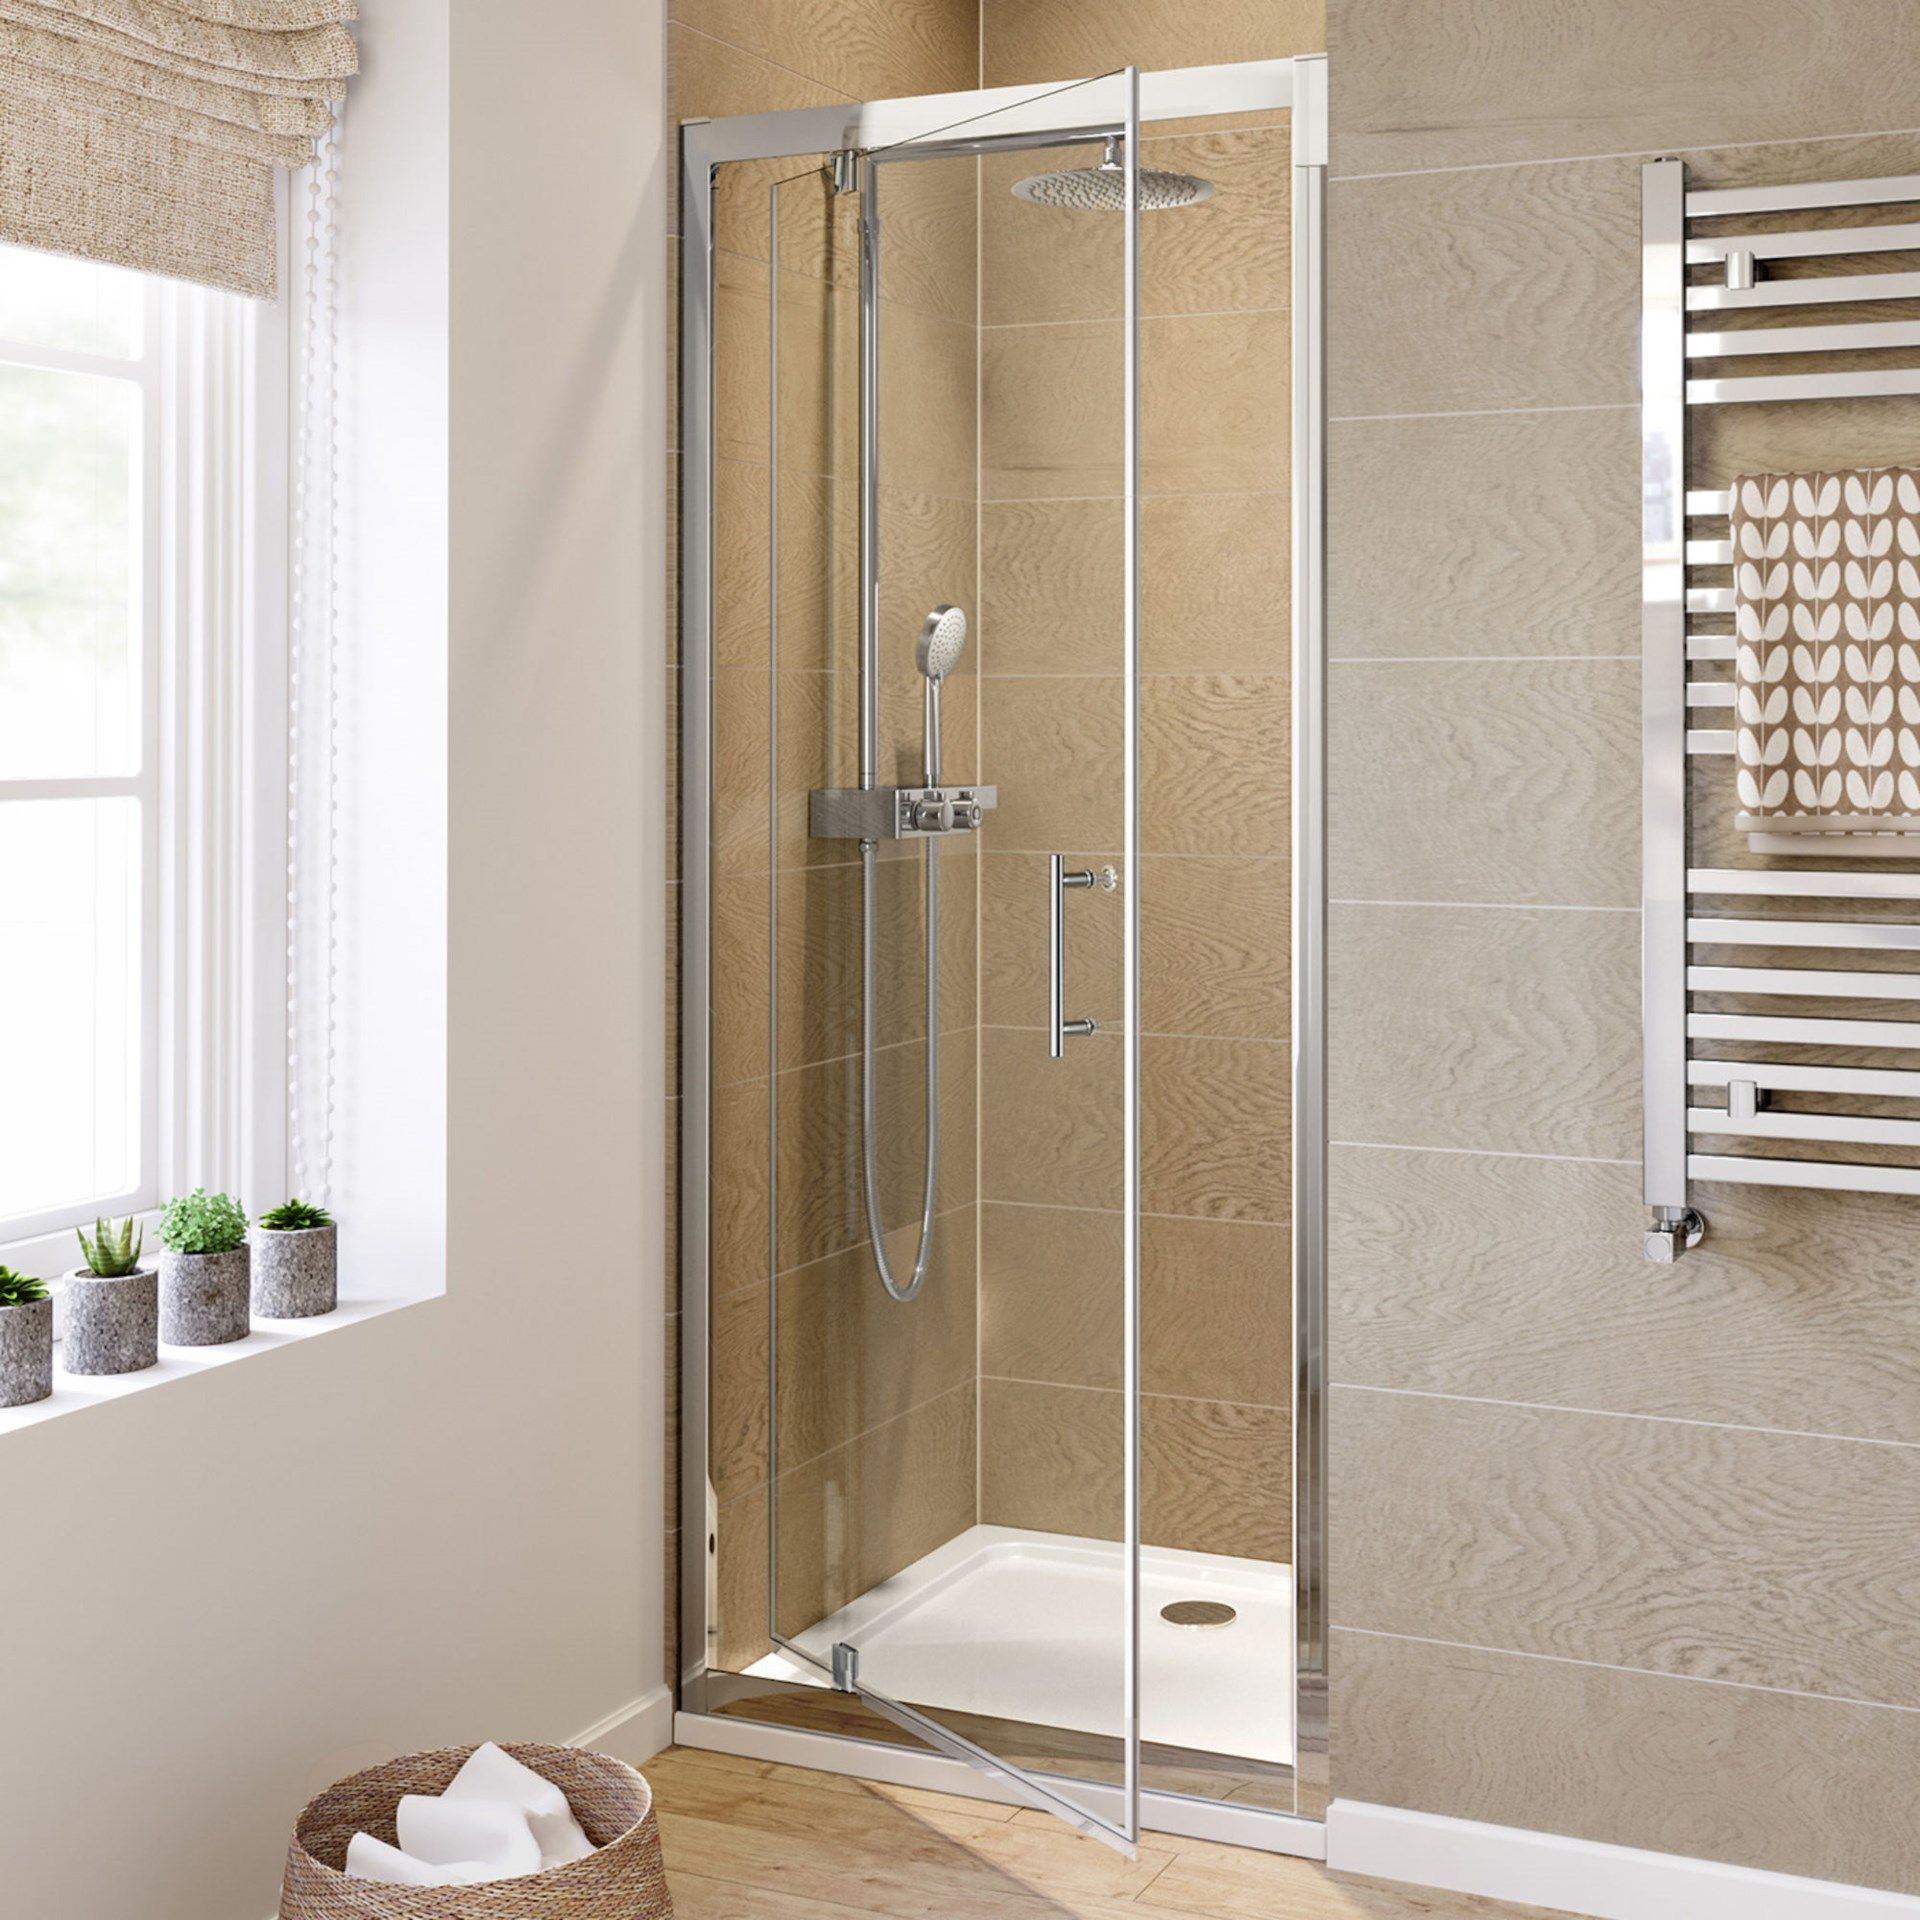 Twyfords 700mm - 6mm - Premium Pivot Shower Door. RRP £299.99.8mm Safety Glass Fully waterproo... - Image 3 of 3